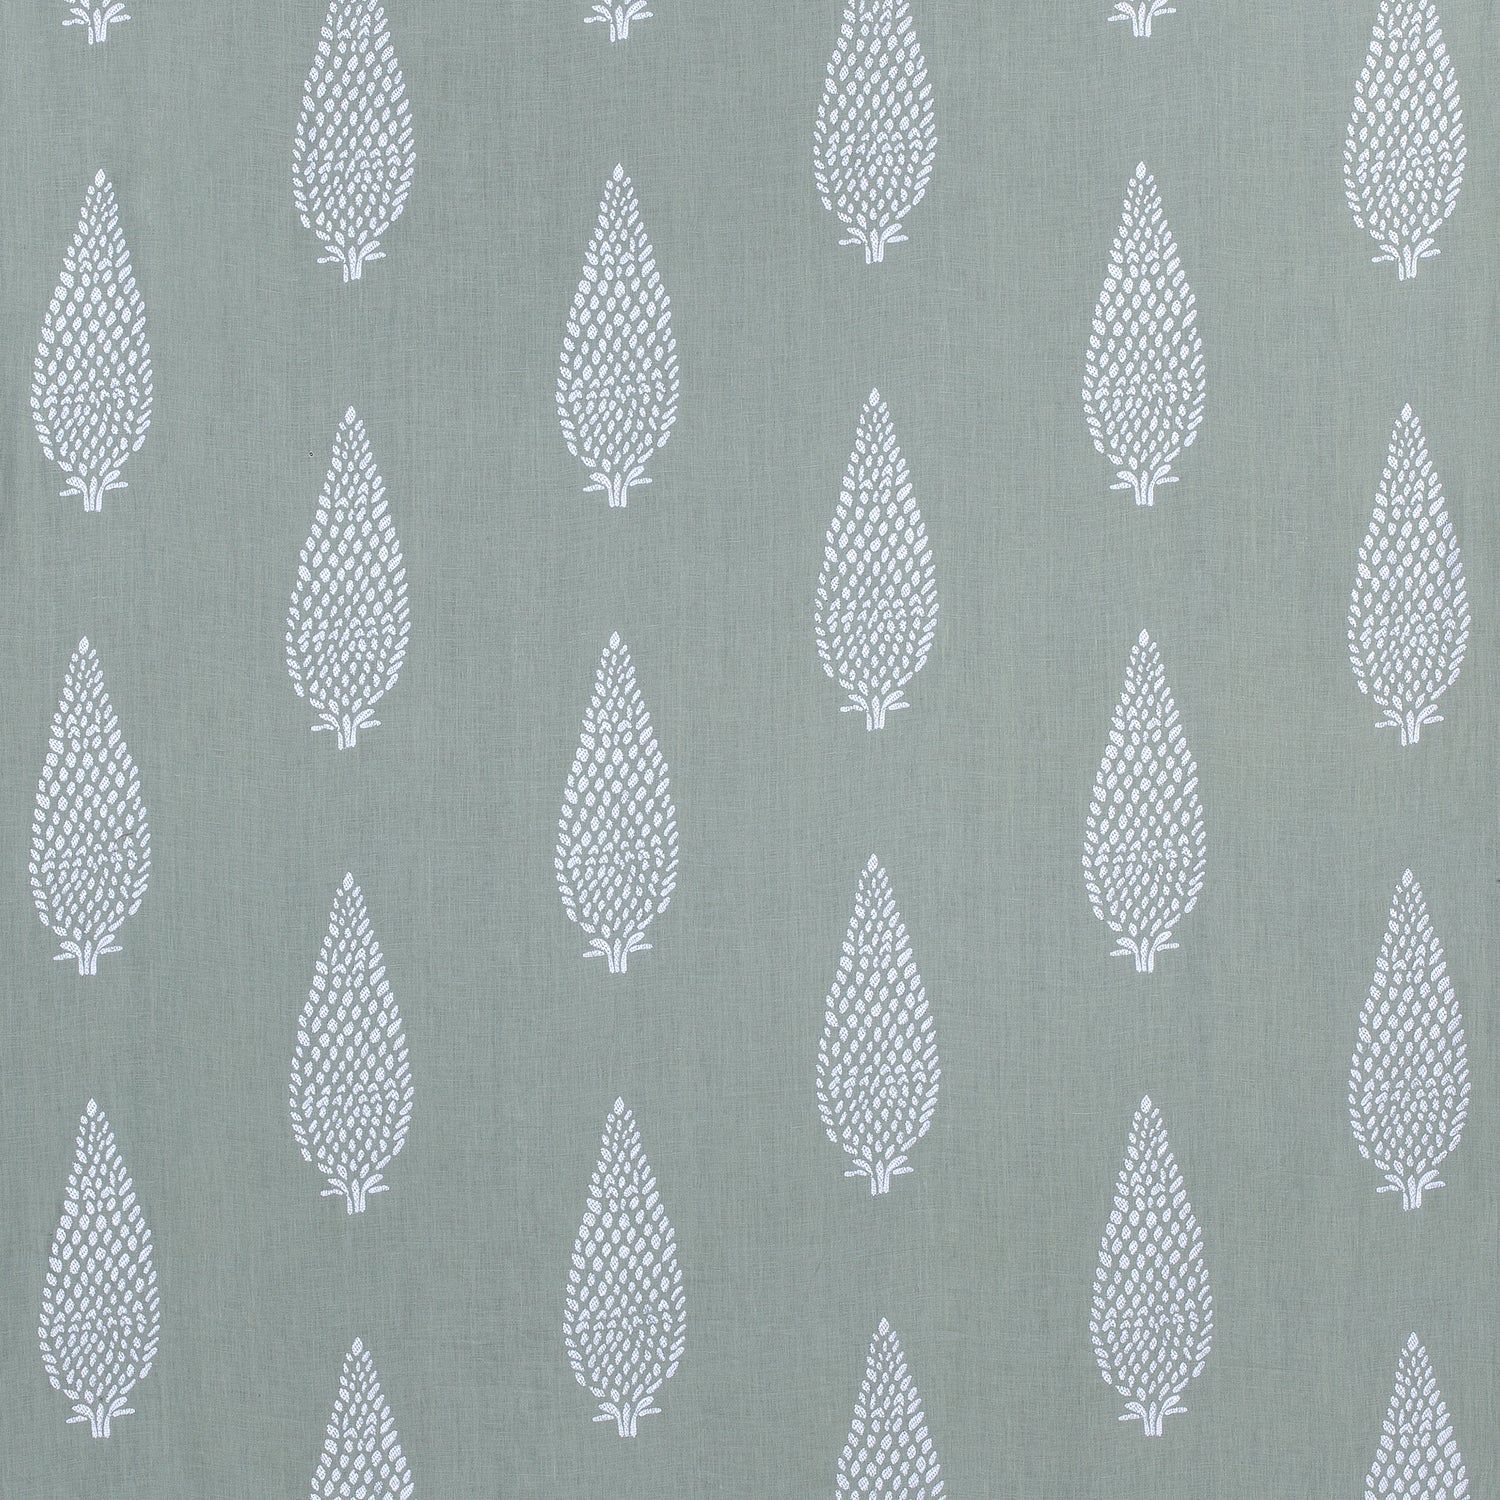 Manor Embroidery fabric in sage color - pattern number AW73007 - by Anna French in the Meridian collection